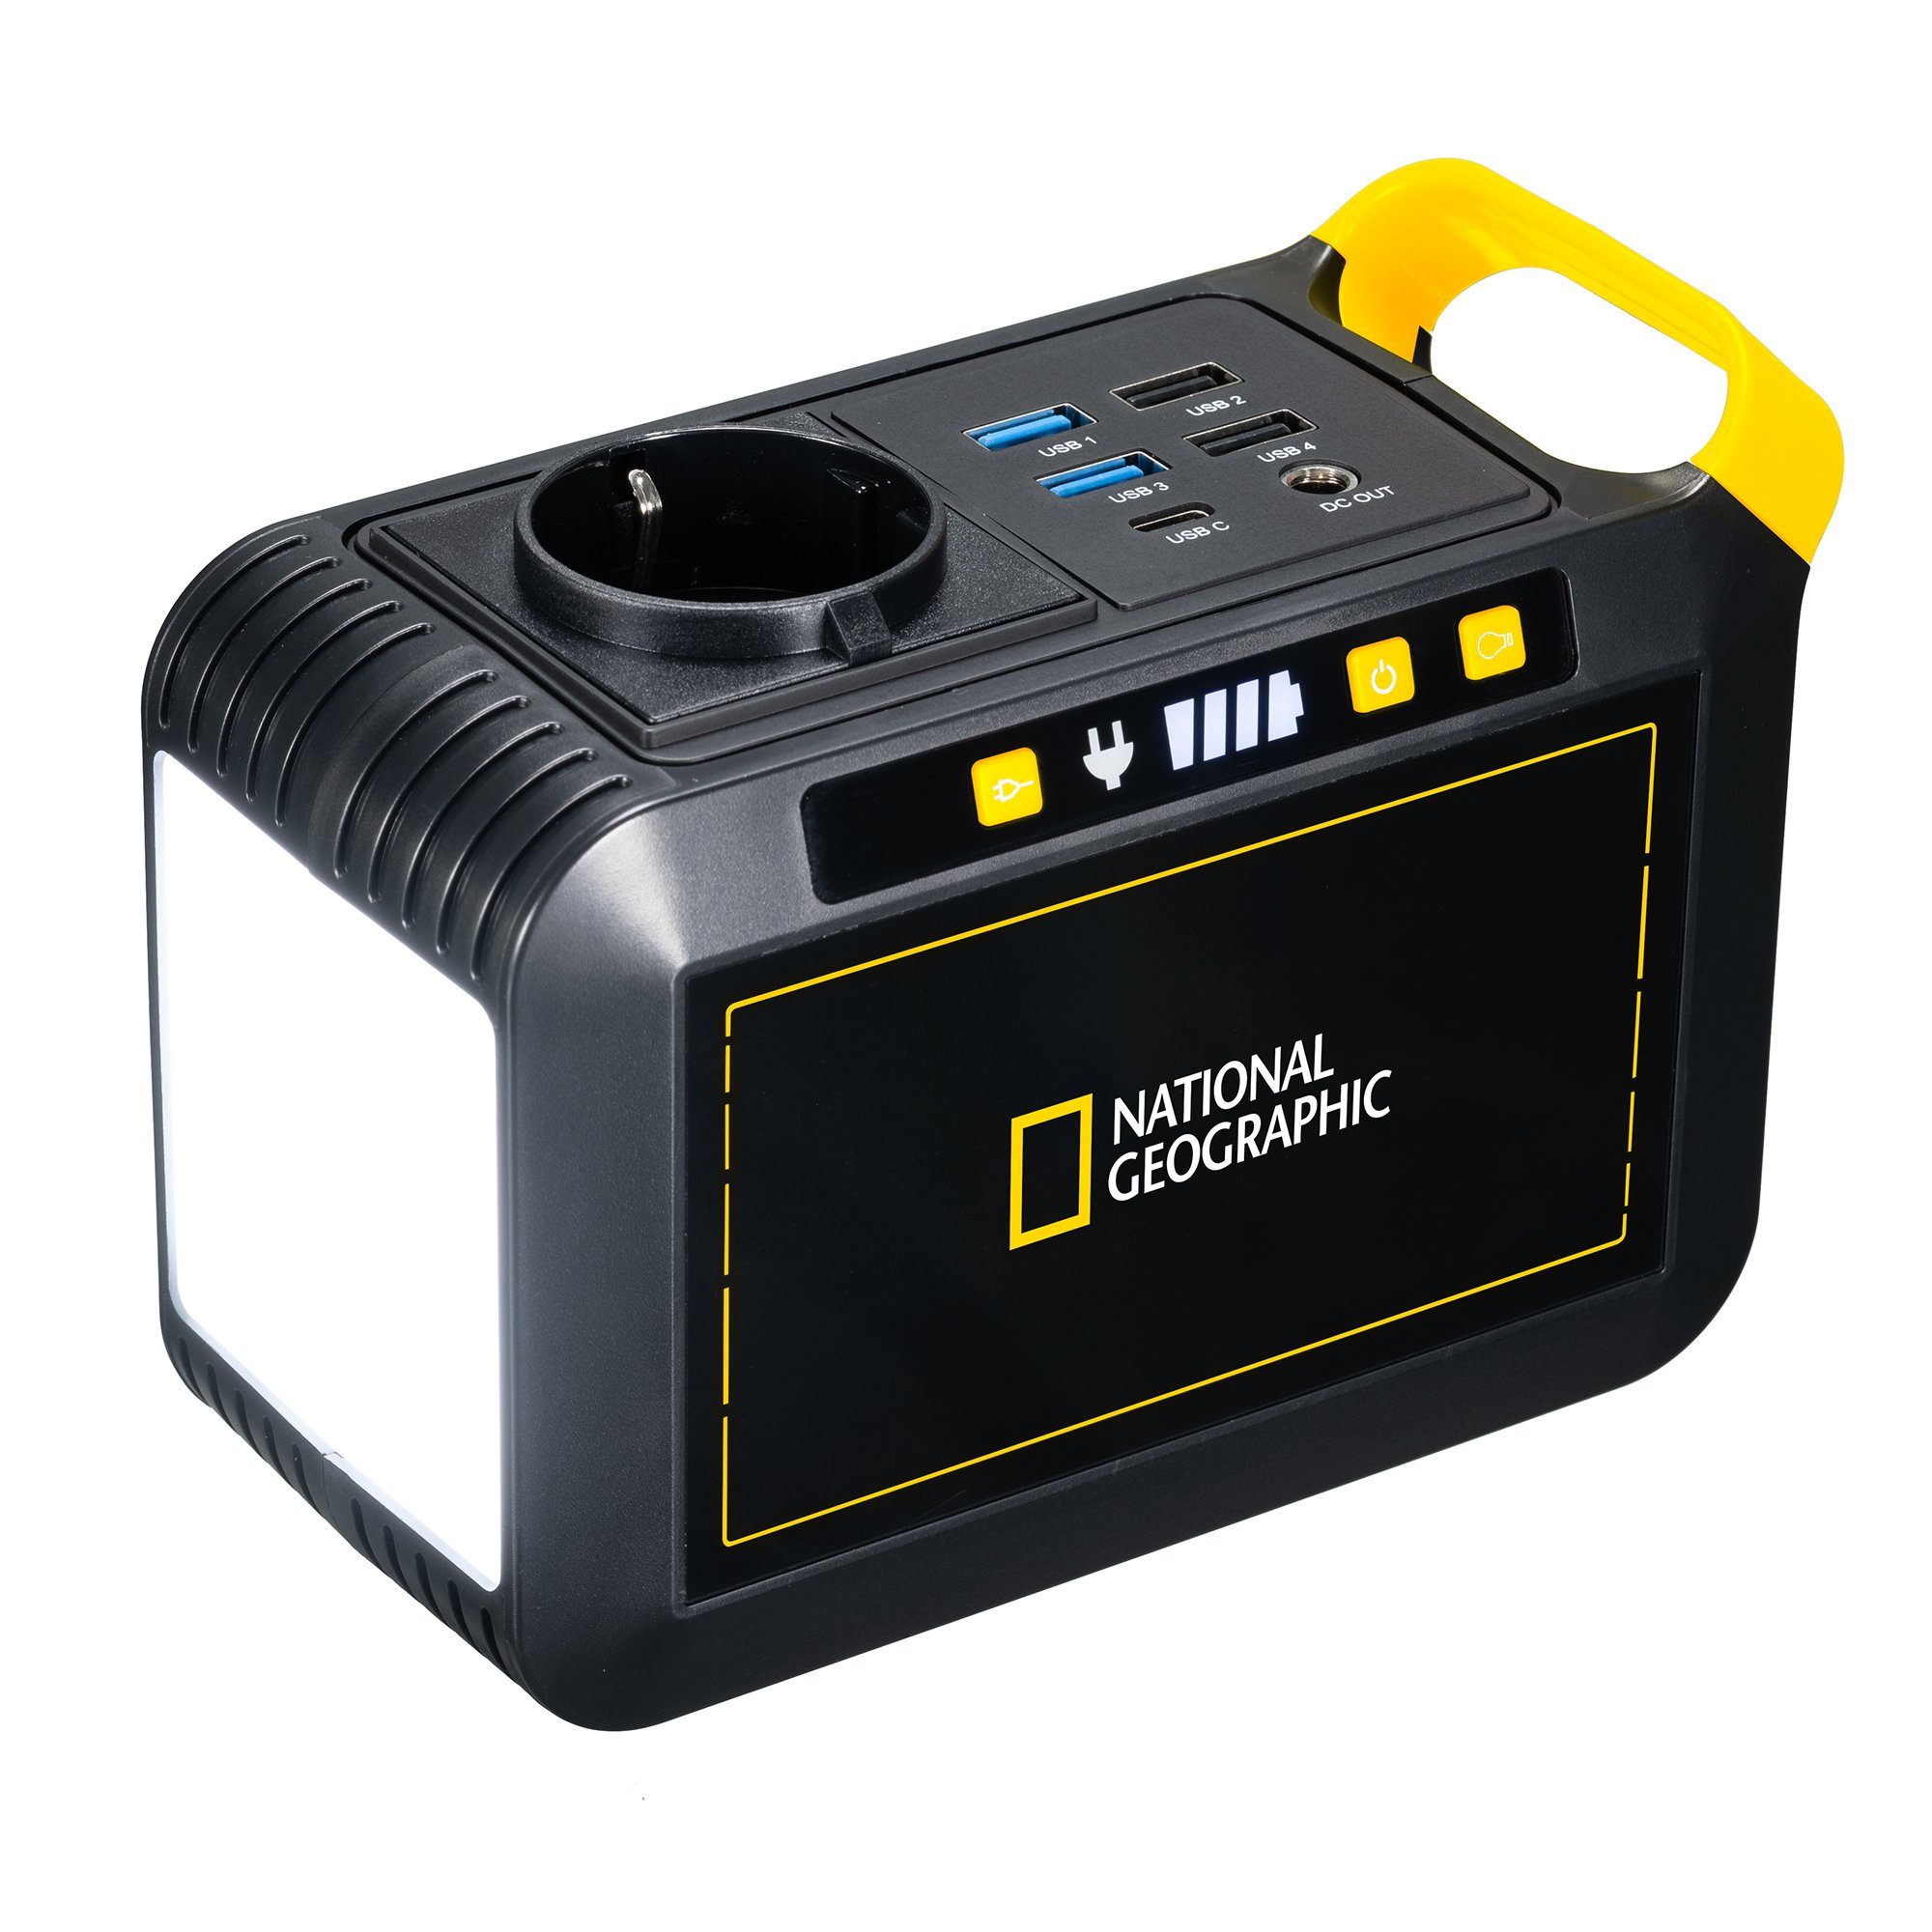 NATIONAL GEOGRAPHIC Walkie Talkie Mobile Power Station